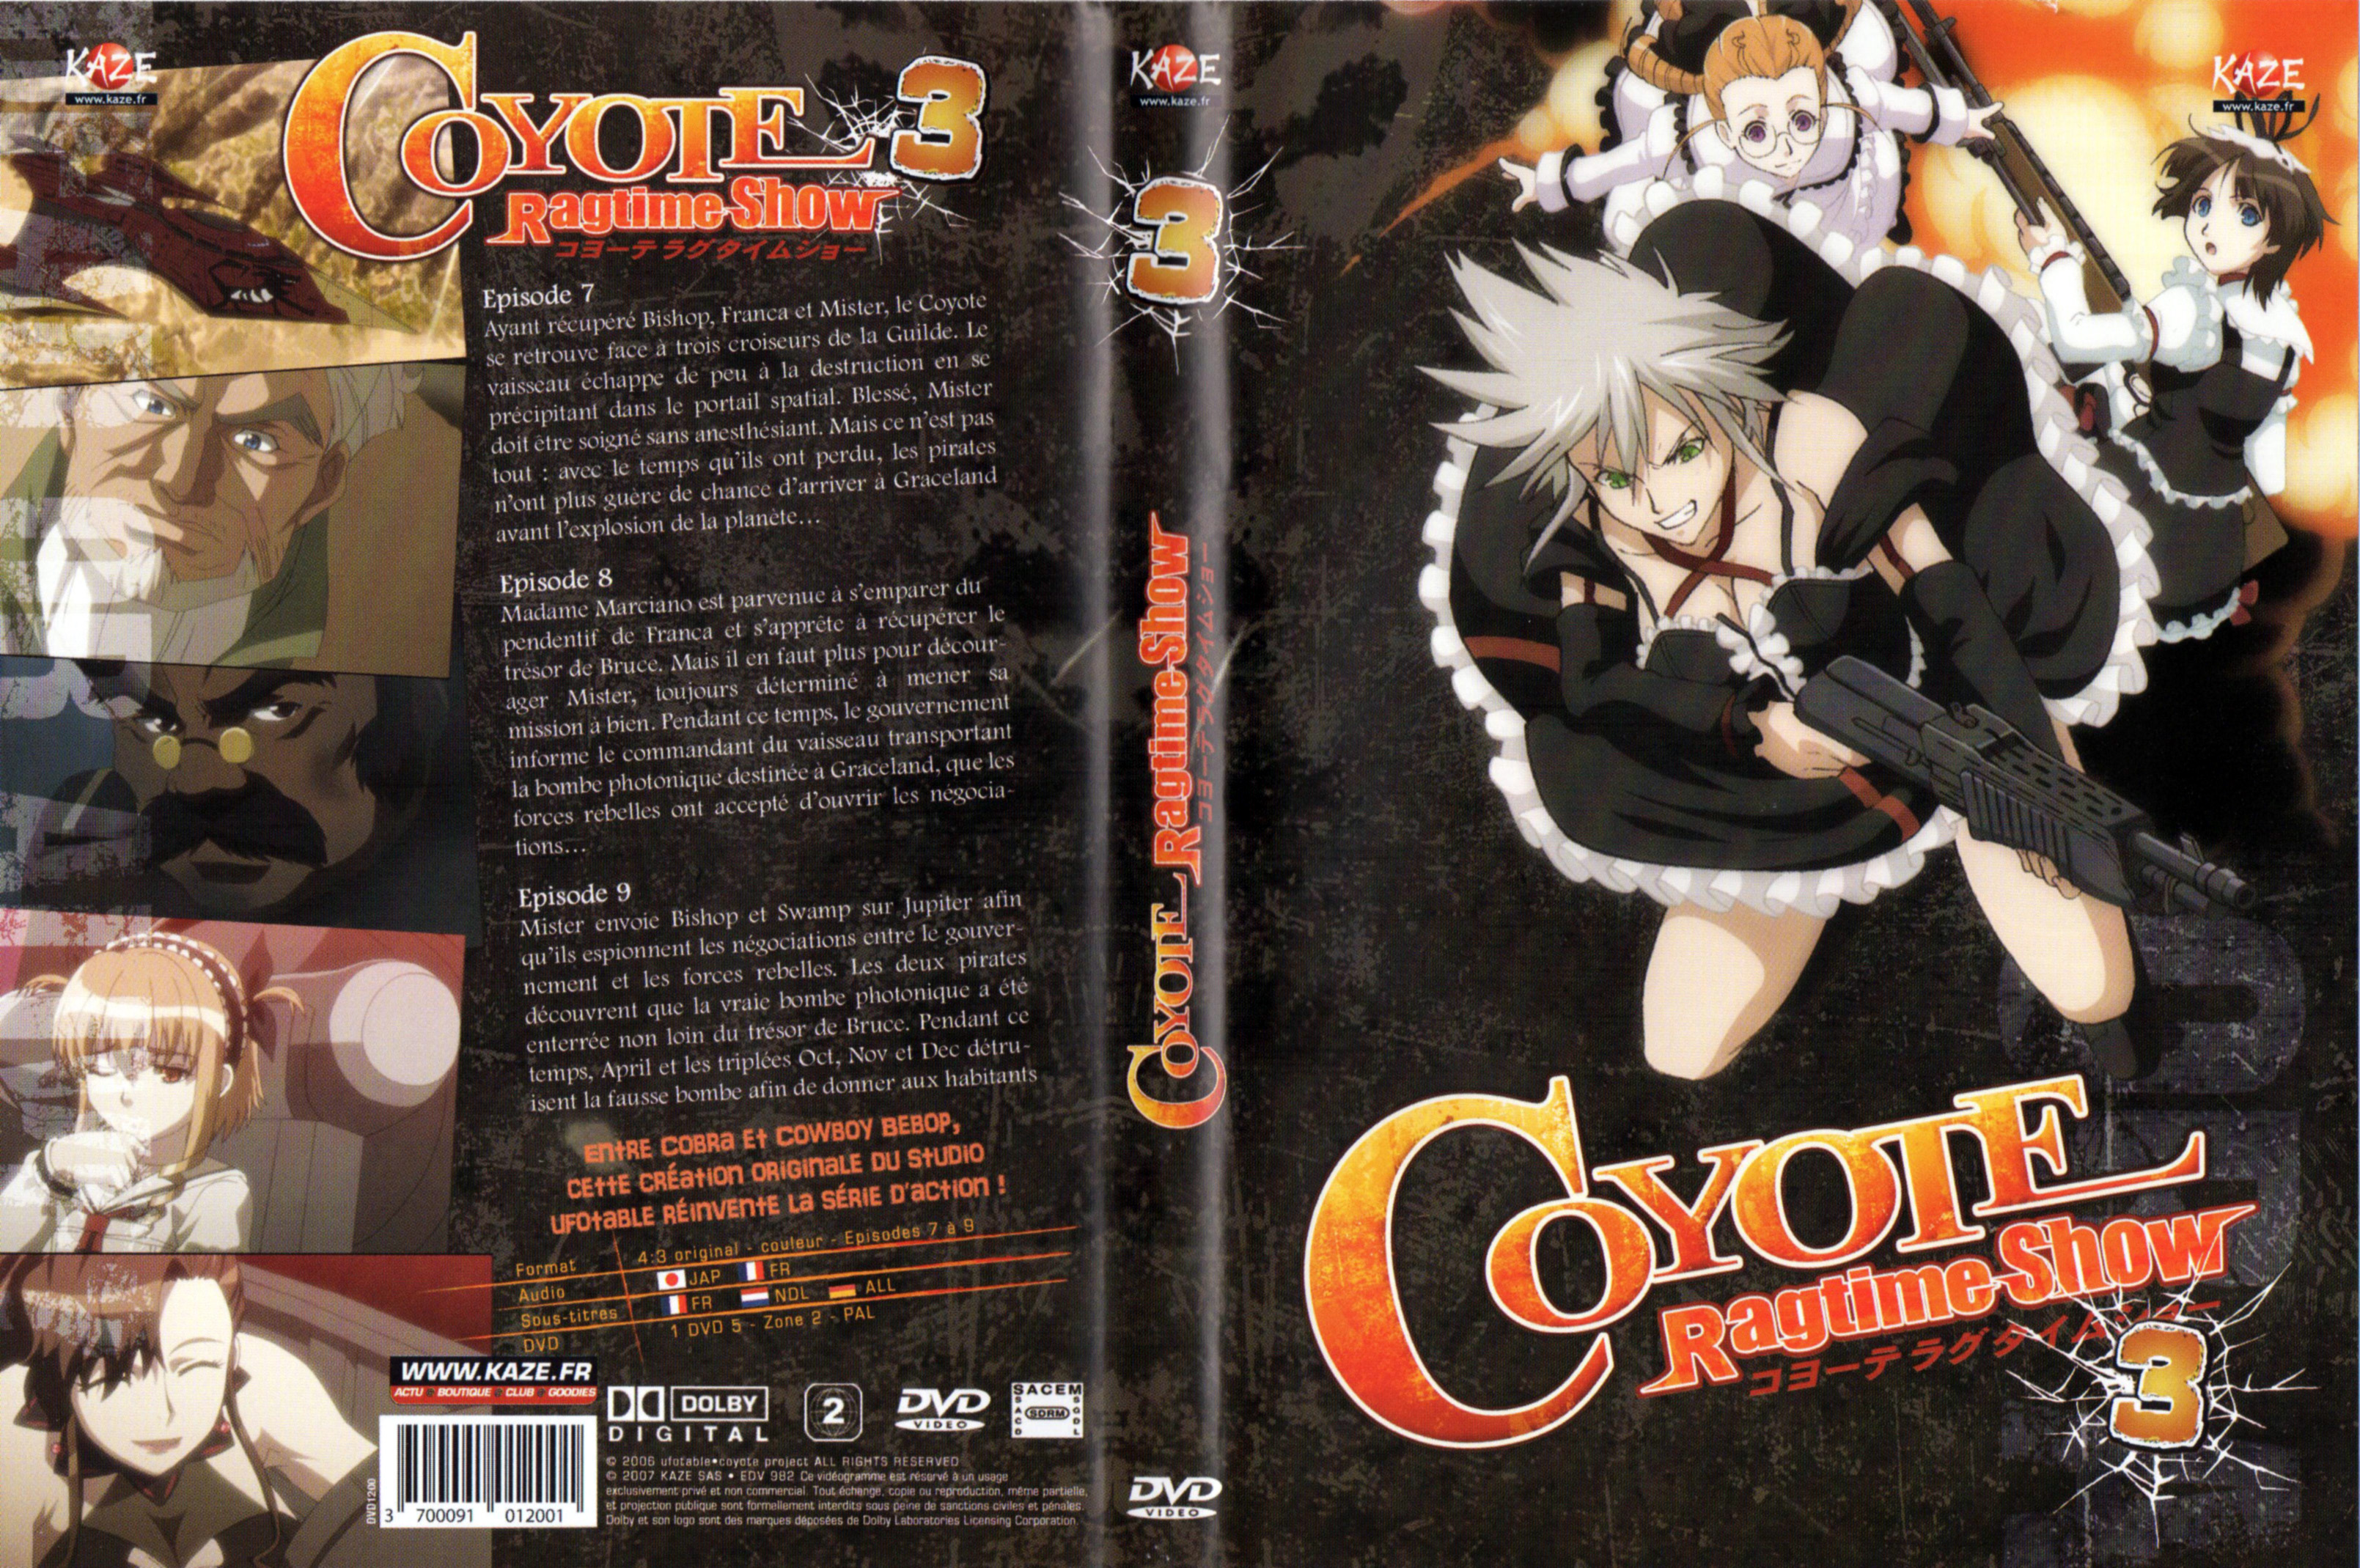 Jaquette DVD Coyote ragtime show vol 3